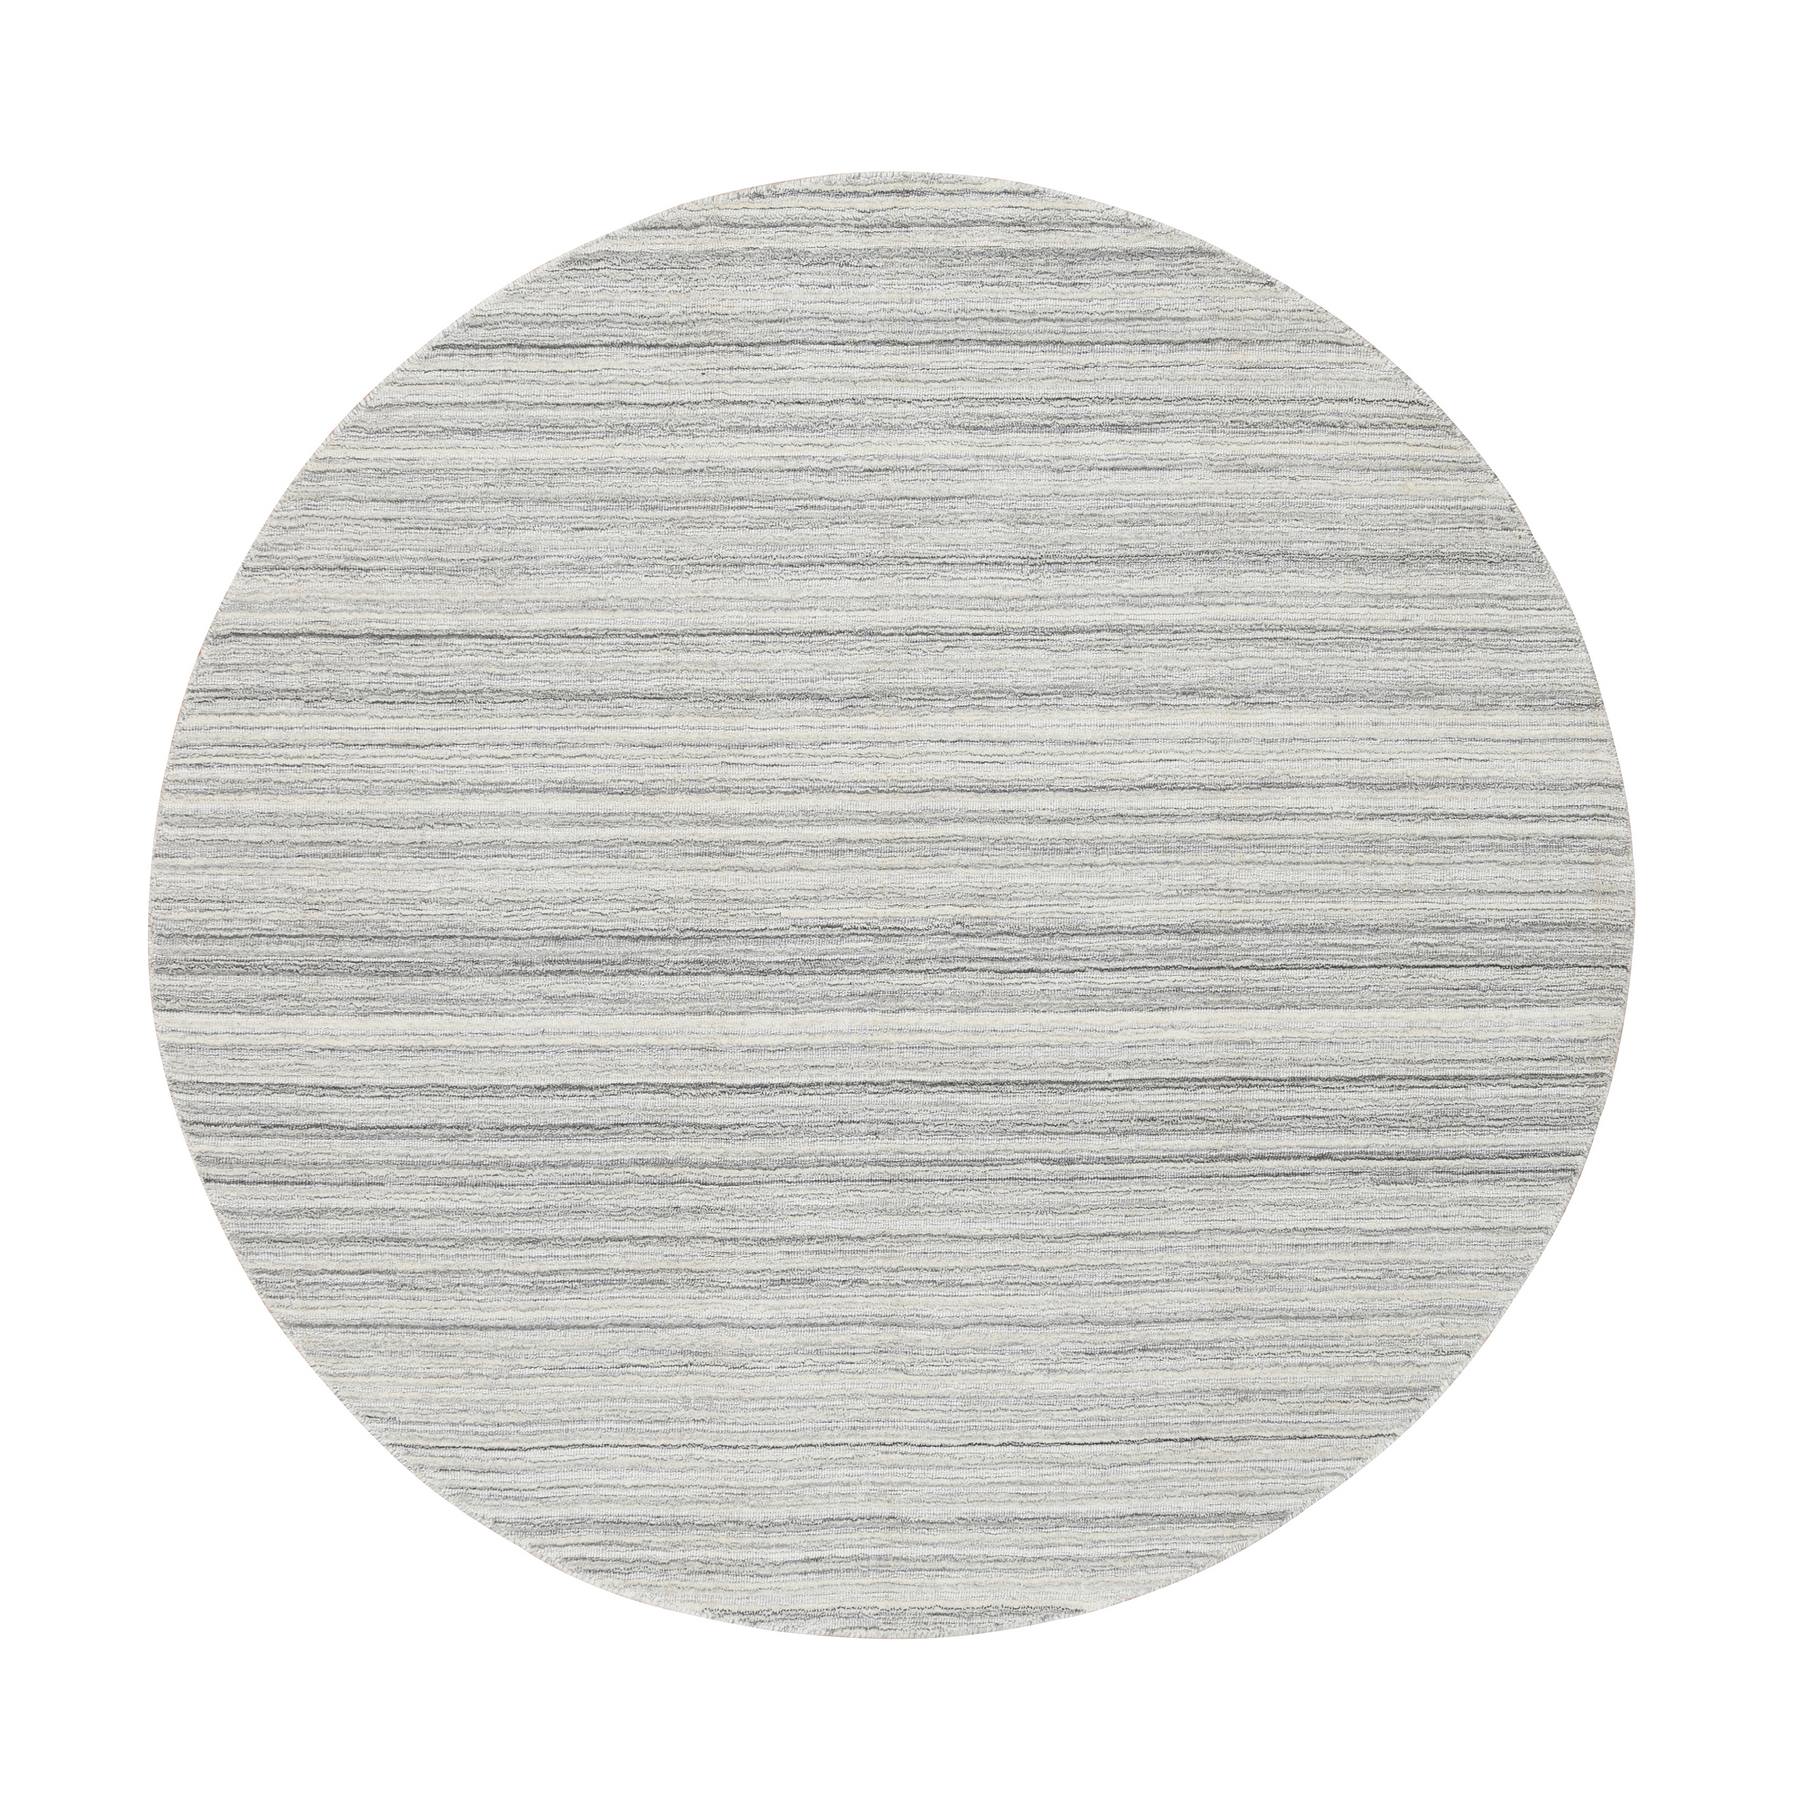 5'10"x5'10" Platinum Gray and Cream, Plain Hand Loomed Undyed Natural Wool, Modern Design Thick and Plush, Round Oriental Rug 